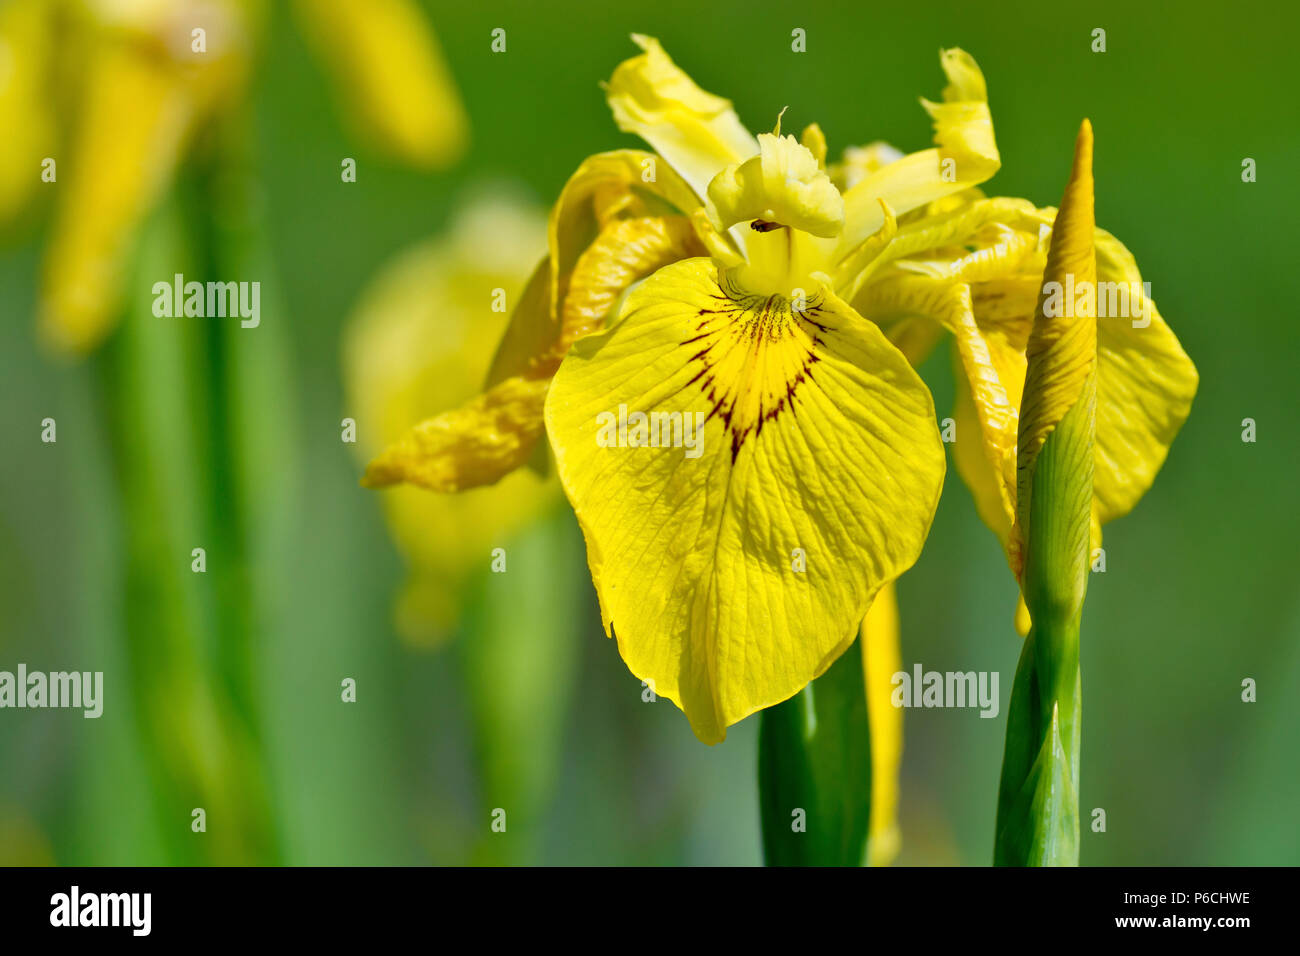 Yellow Iris (iris pseudacorus), also known as Yellow flag, close up of a single flower with buds. Stock Photo